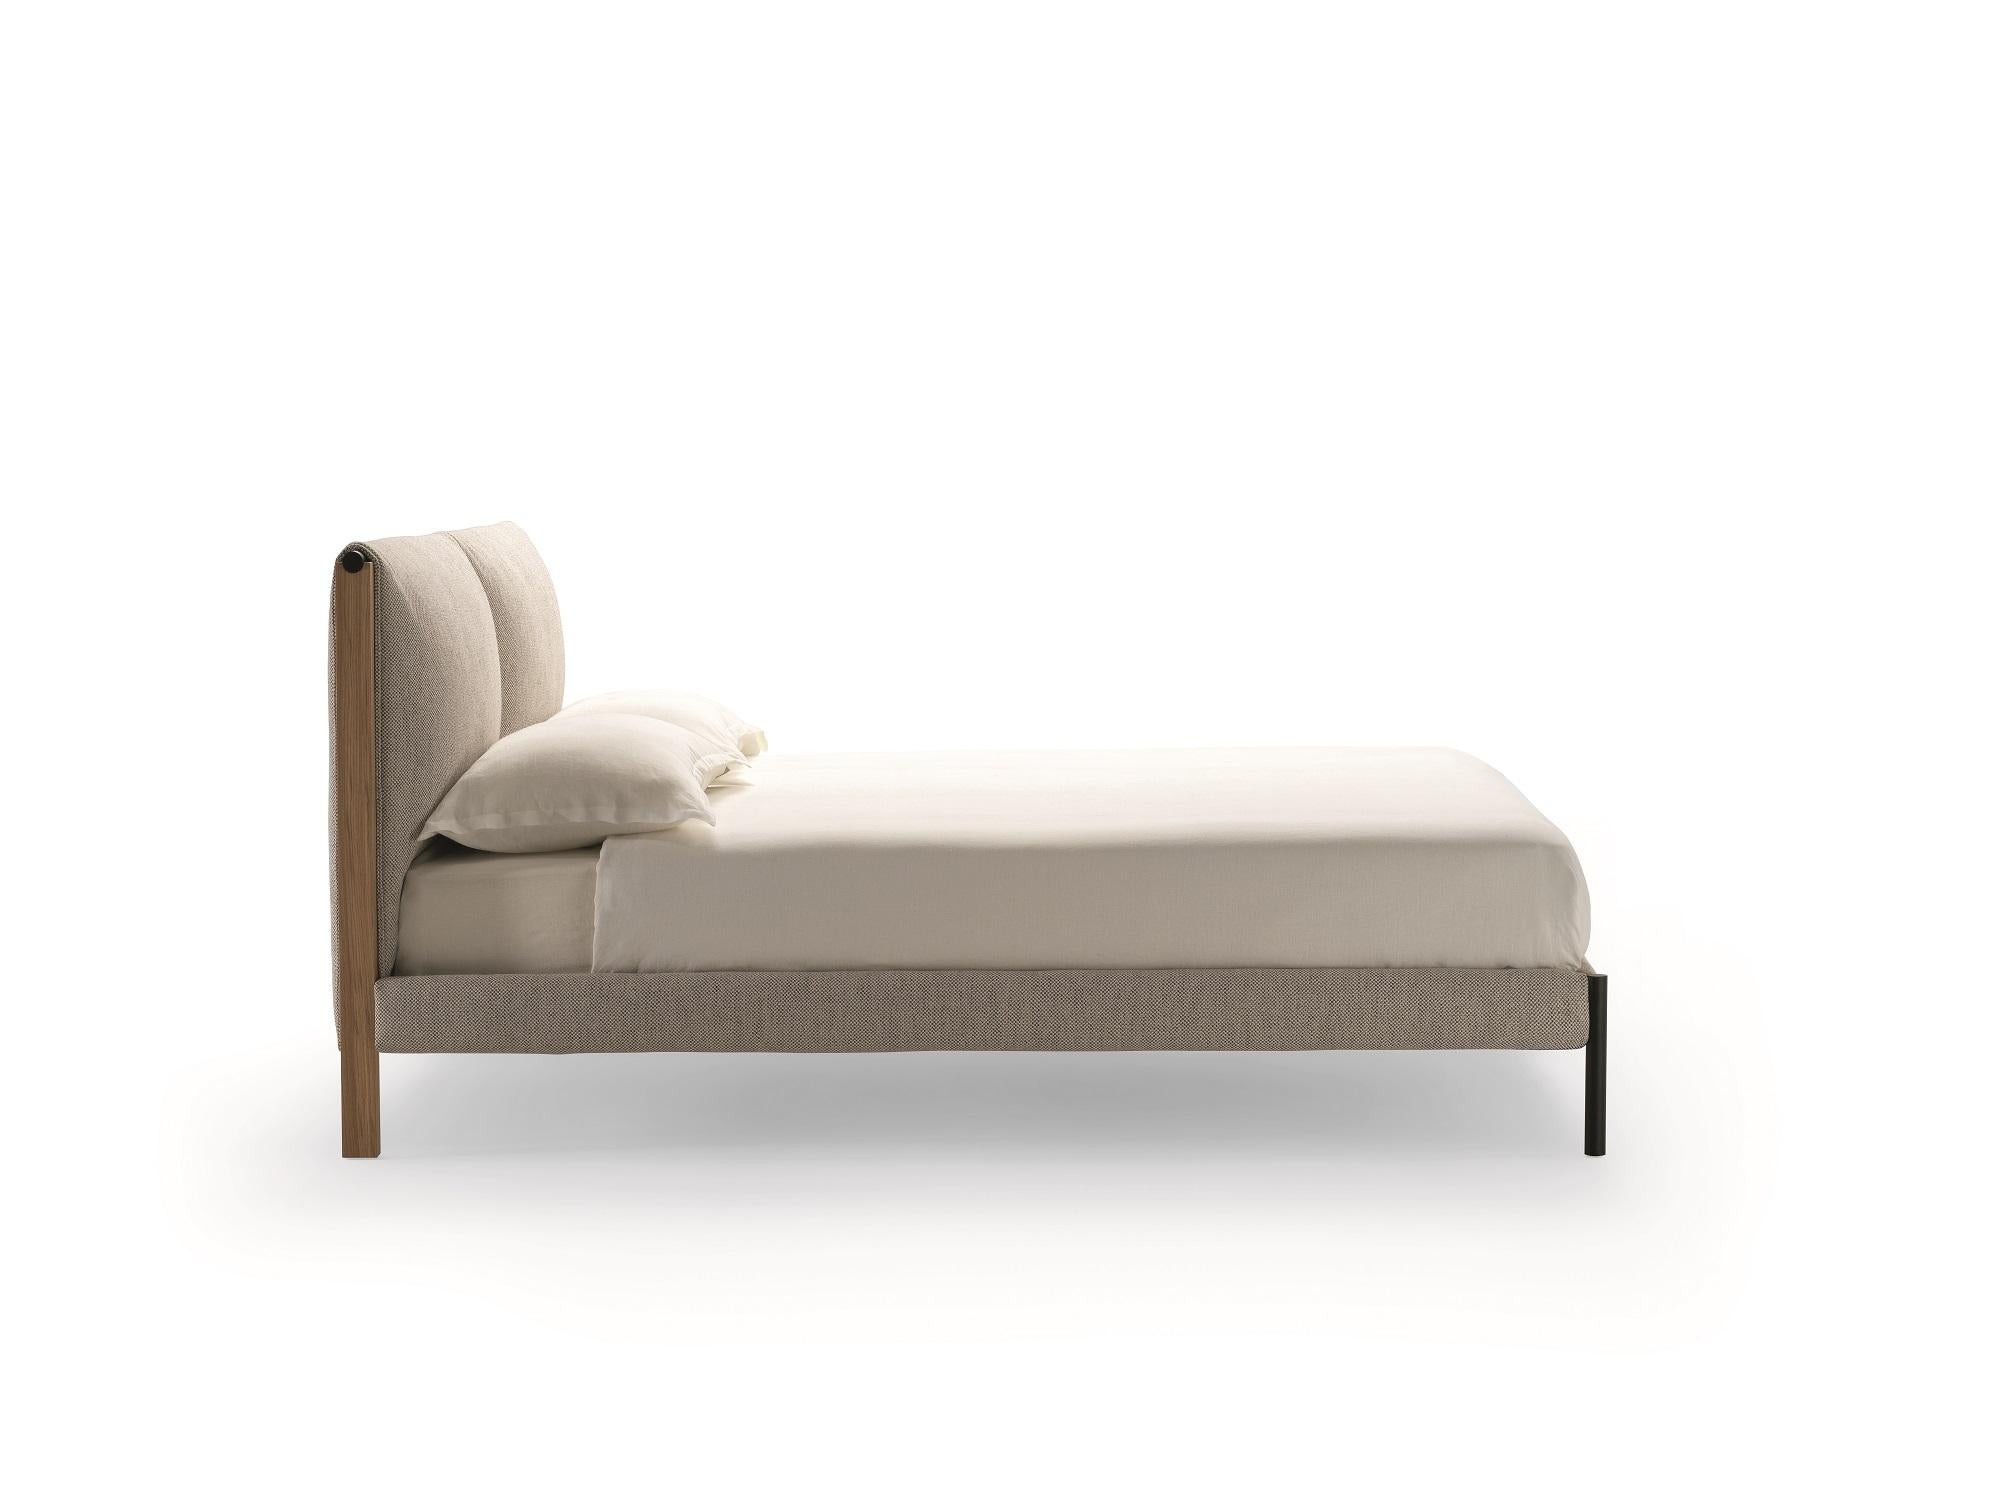 Zanotta Large Ricordi Bed with Single Springing in Toce Upholstery by Spalvieri & Del Ciotto

Bed with single springing. Headboard frame in natural or in open pore black painted oak. Upholstery in polyurethane/heat-bound polyester fibre. Front feet